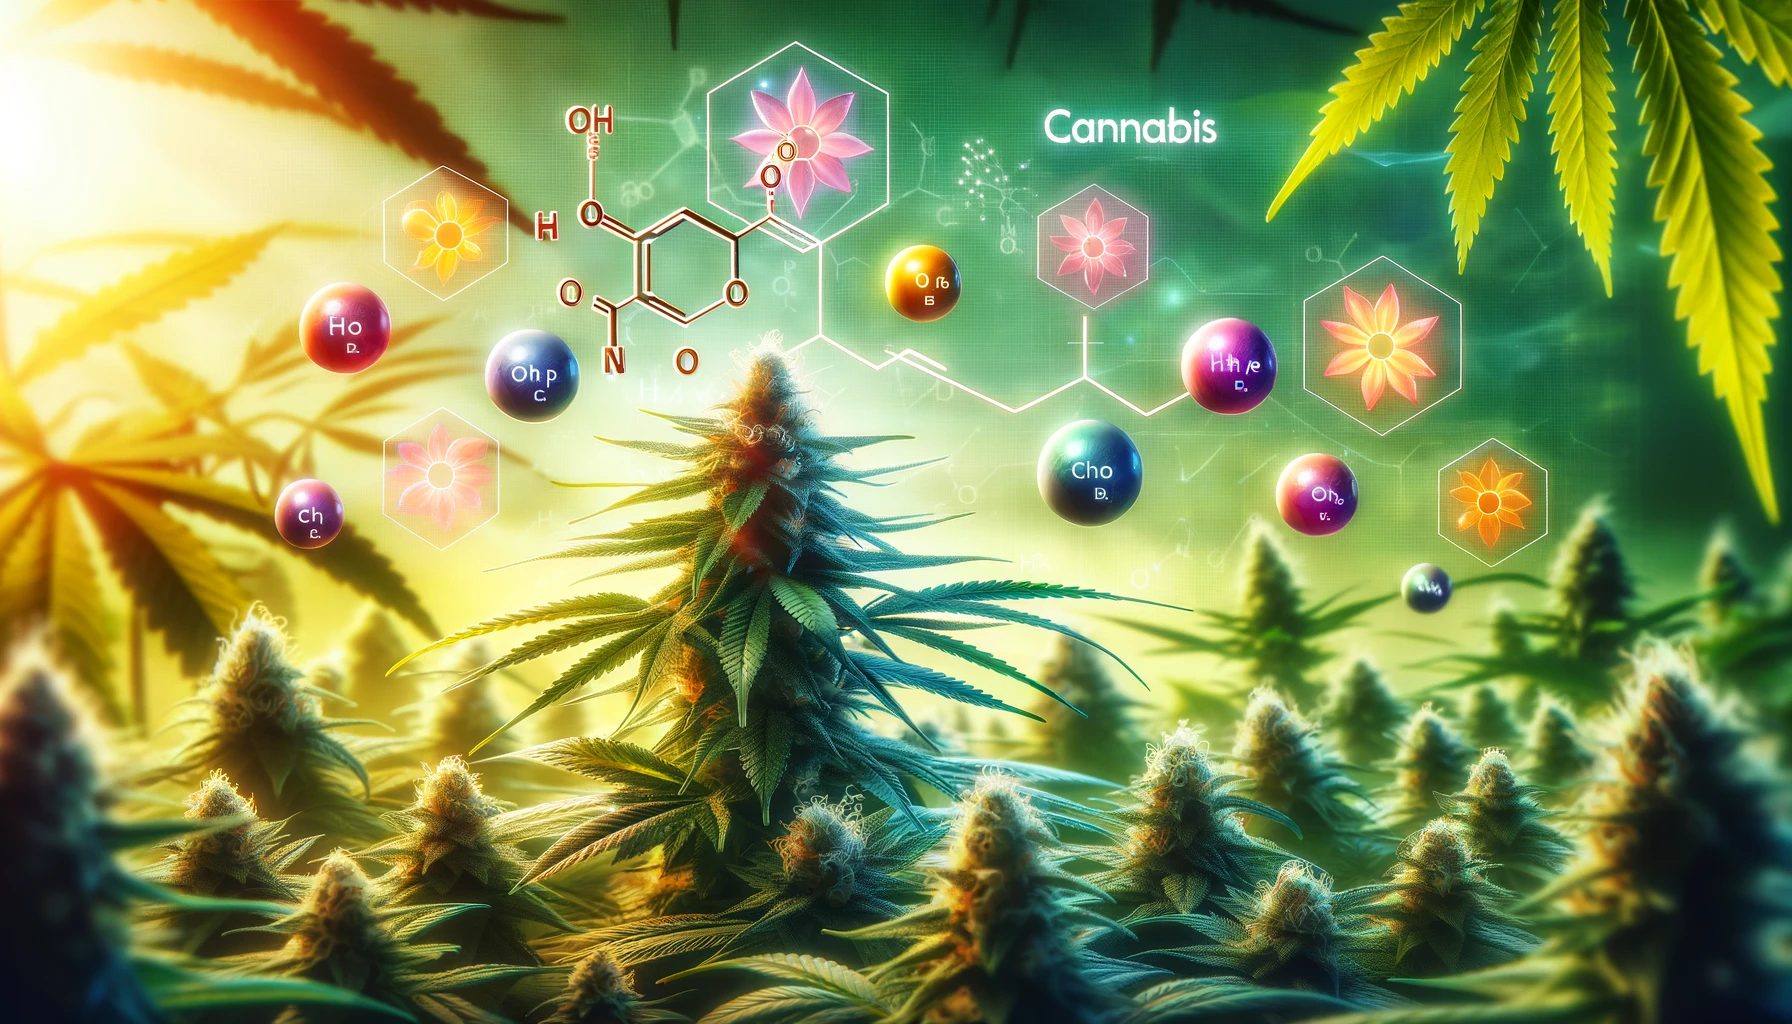 Cannabis Terpenes: What Are They and What Do They Do?